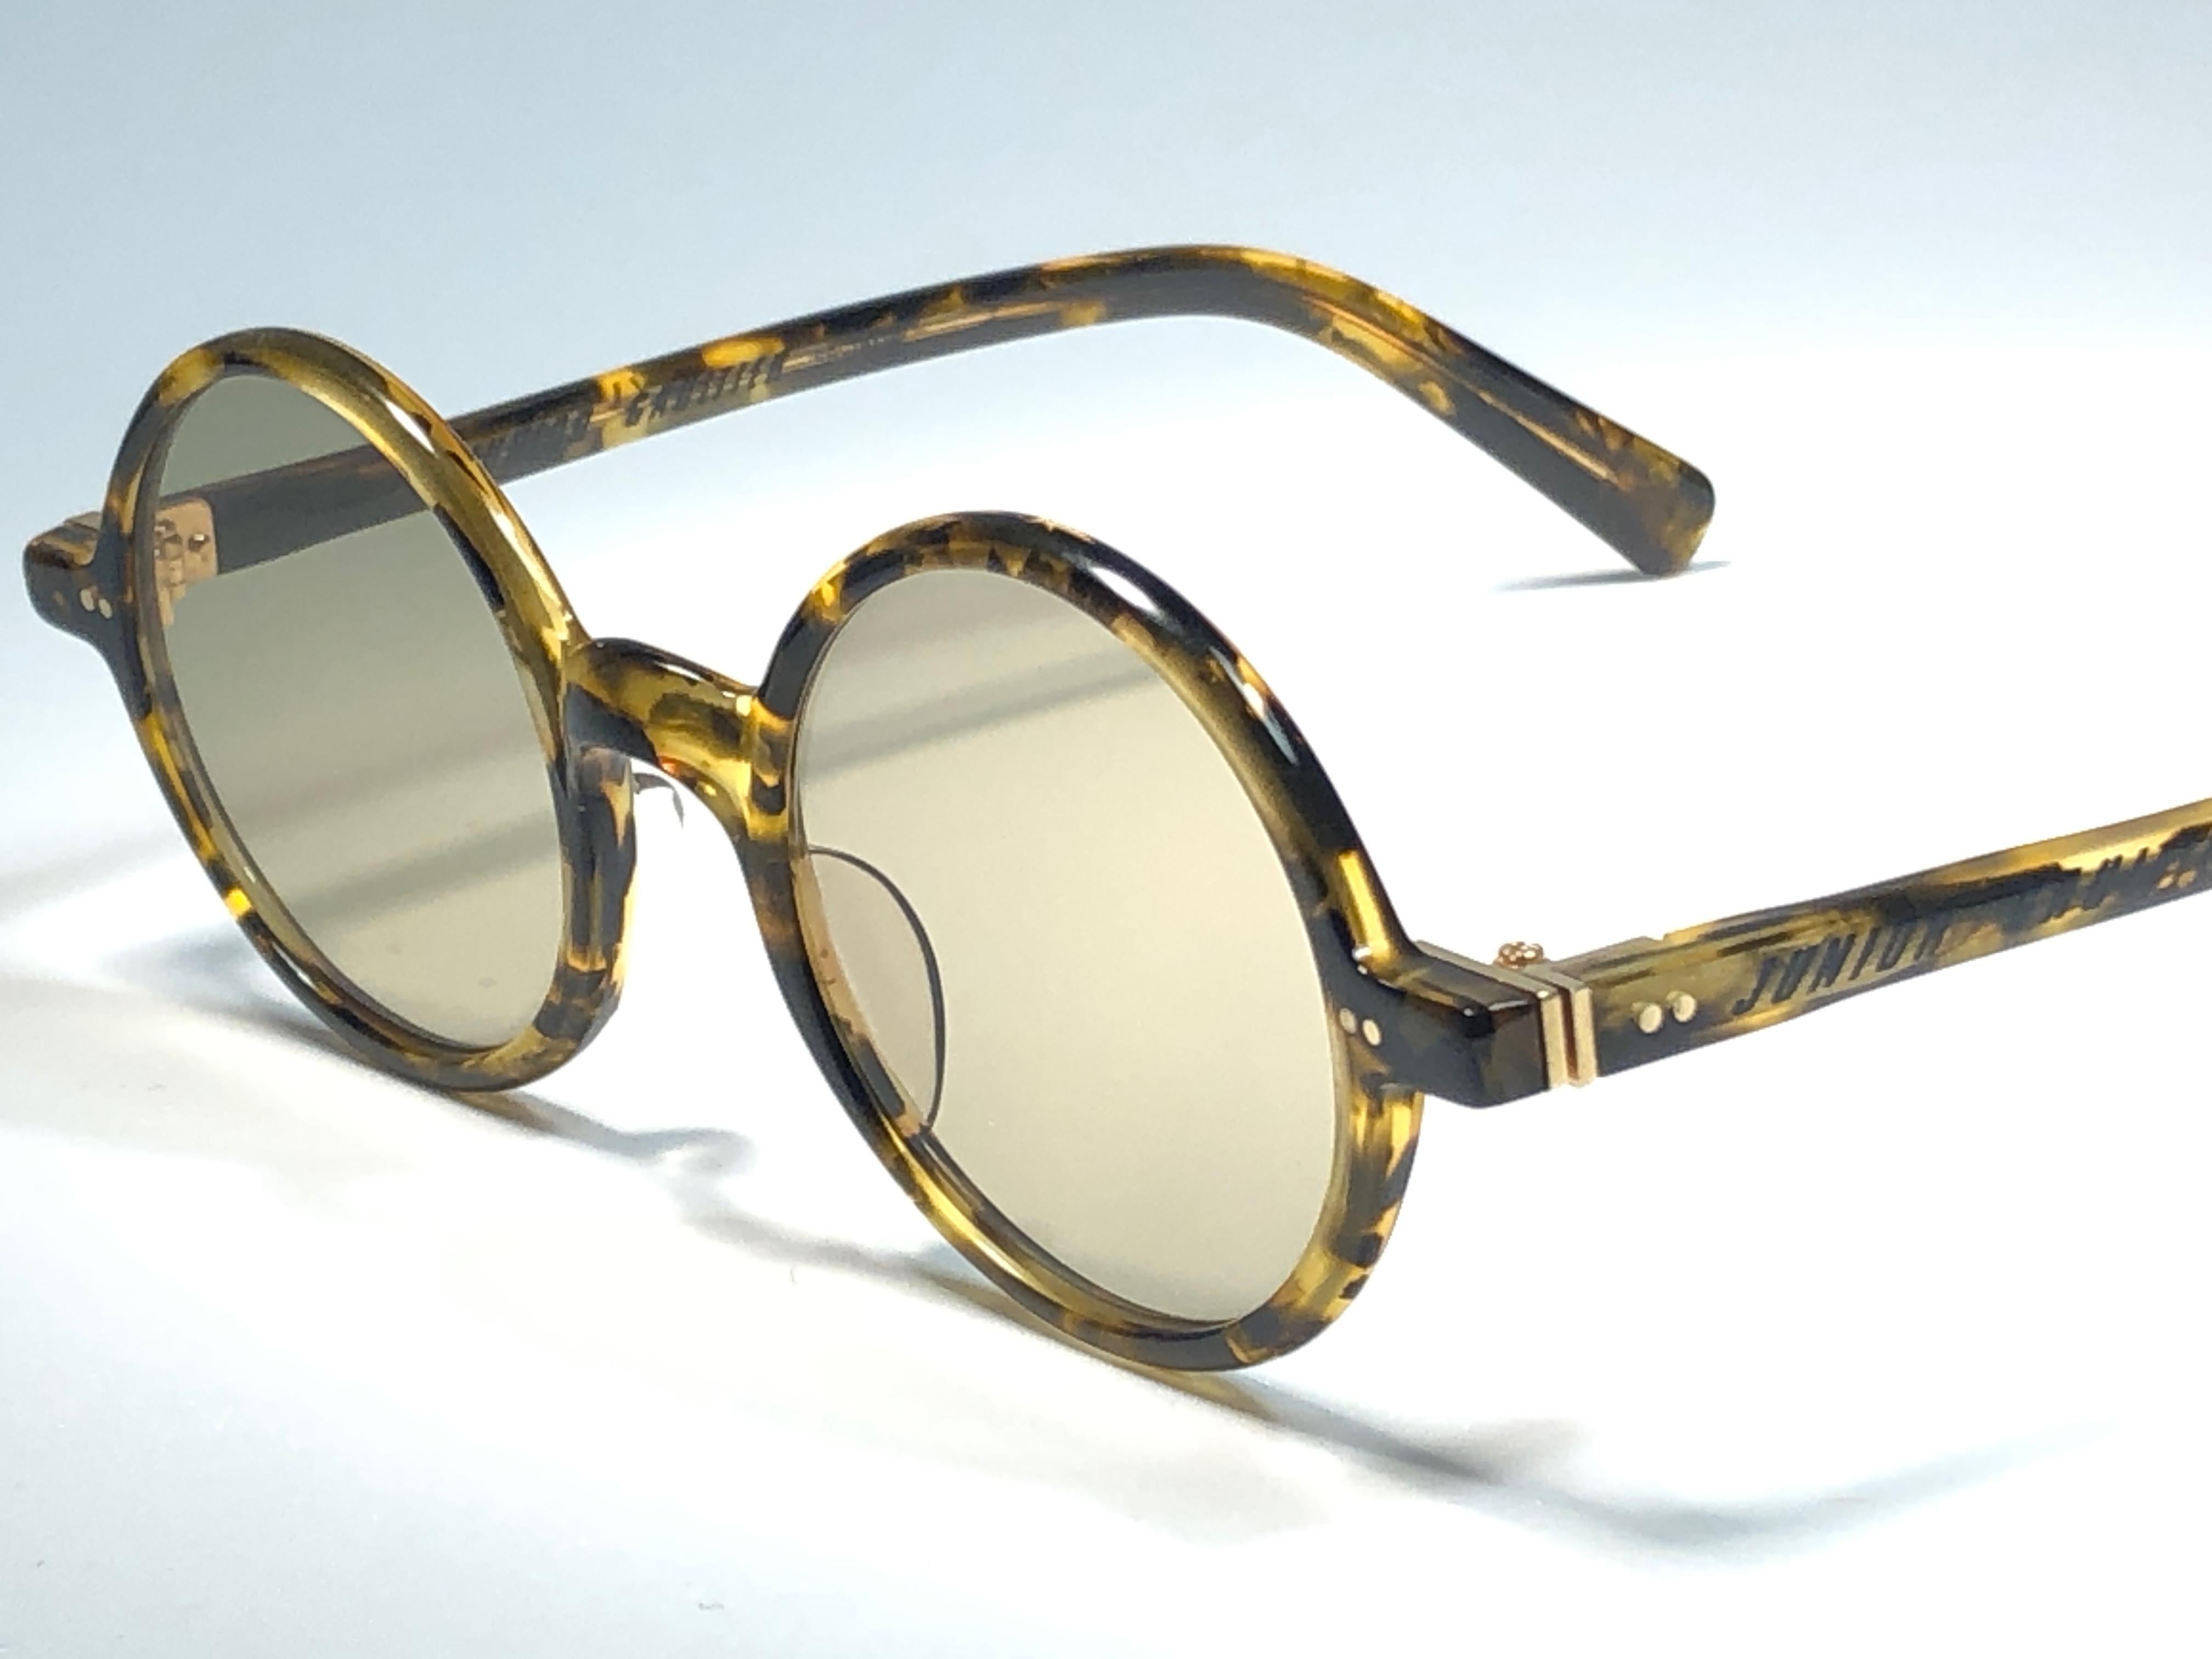 New Vintage Jean Paul Gaultier Junior 58 0072 XS Small frame in tortoise pattern.
Flat lenses for aa complete JPG look. 
The same model worn by Jean Reno in Luc Besson's, Leon The Professional.
Design and produced in the 1900's a timeless and iconic